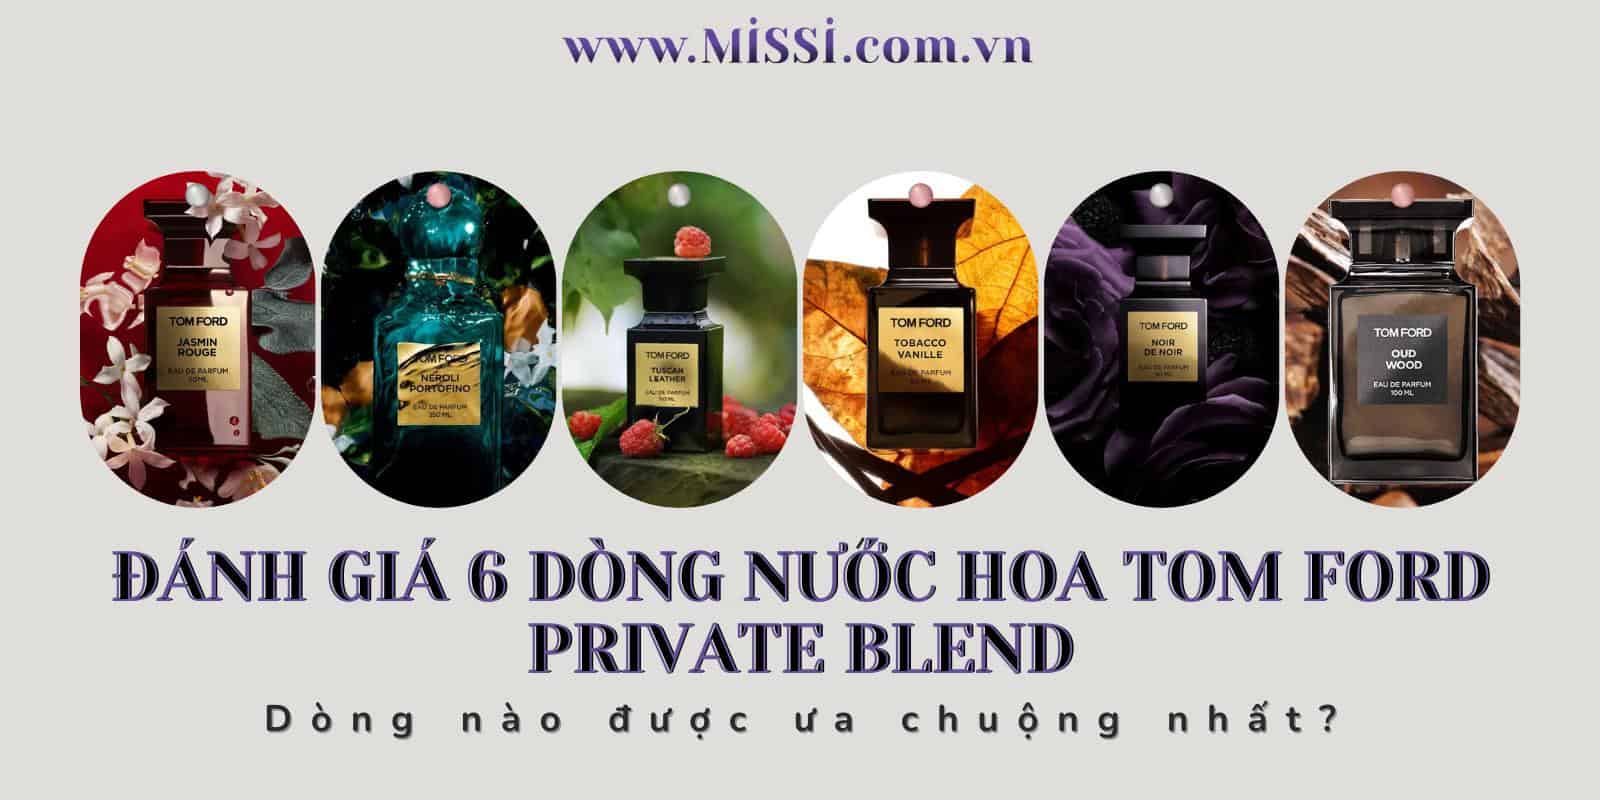 Danh gia 6 dong nuoc hoa Tom Ford Private Blend Dong nao duoc ua chuong nhat